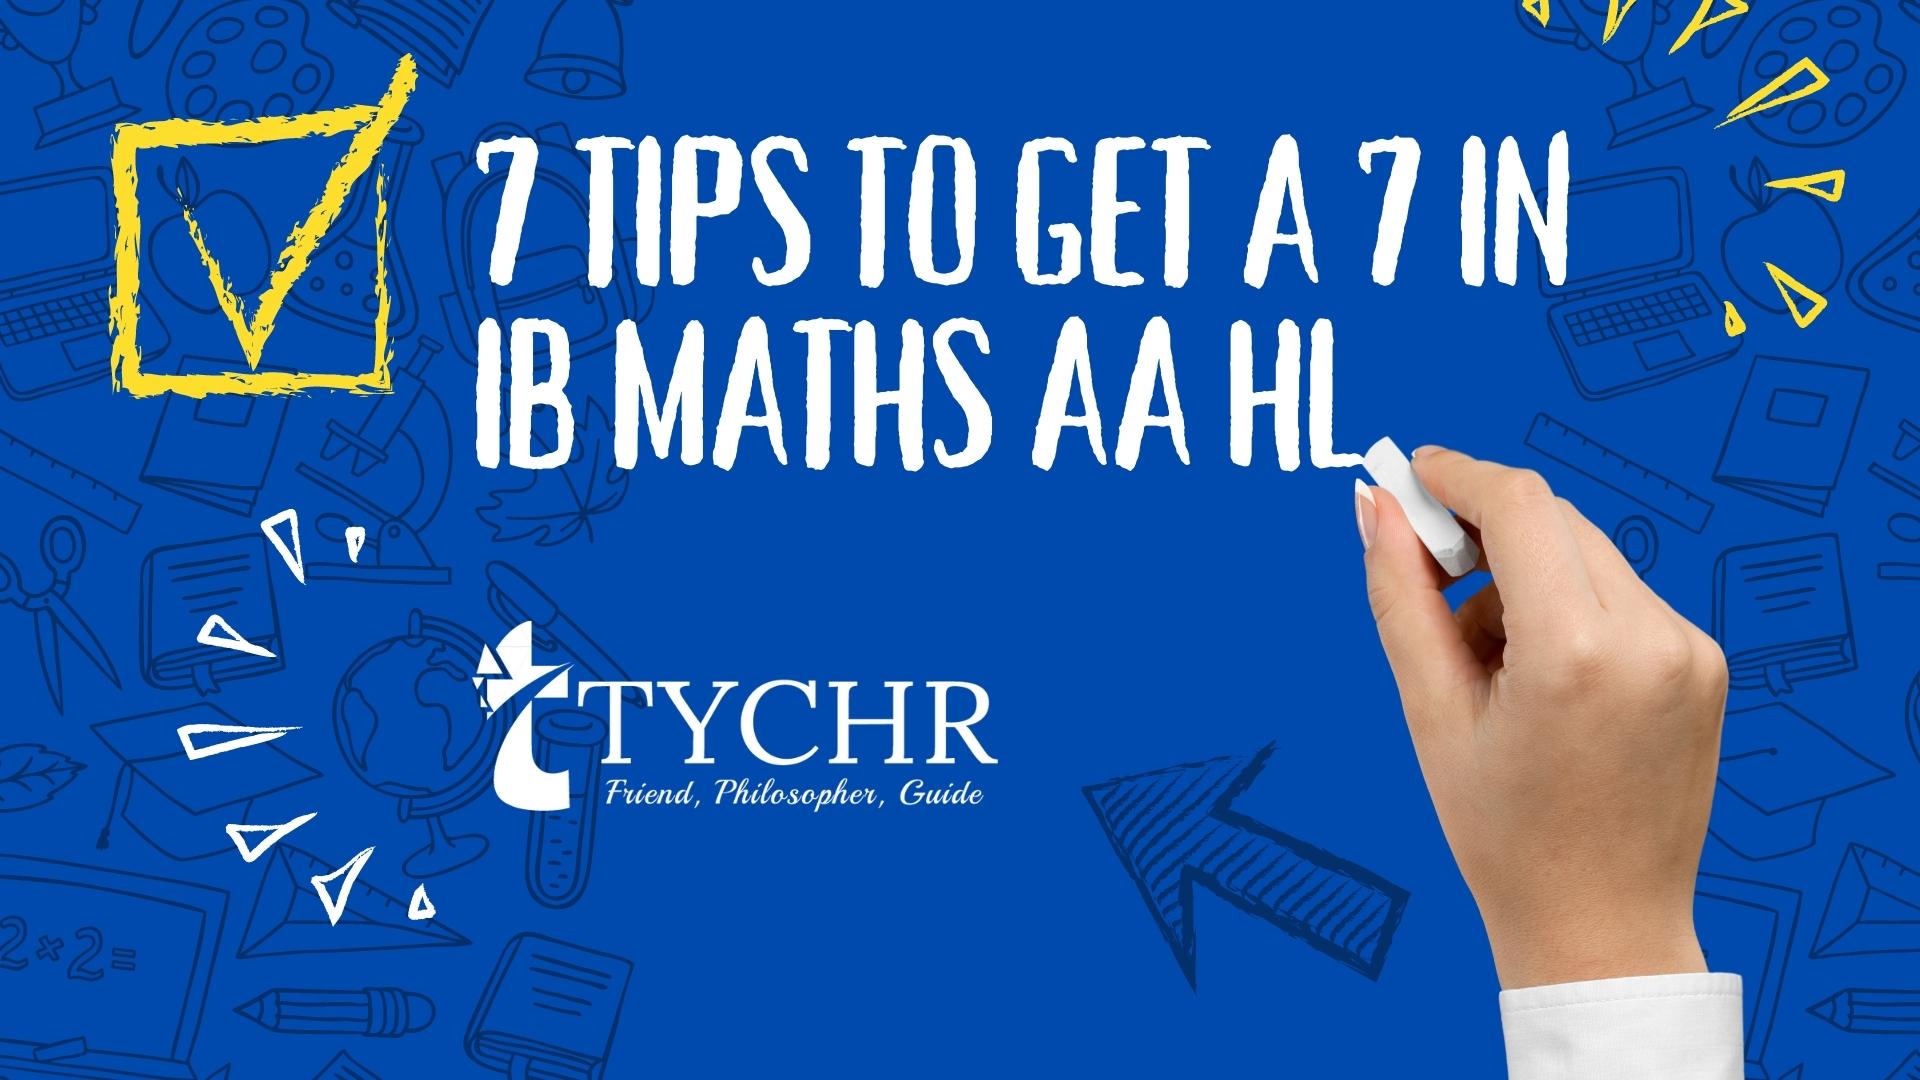 7 Tips to get a 7 in IB Maths AA HL